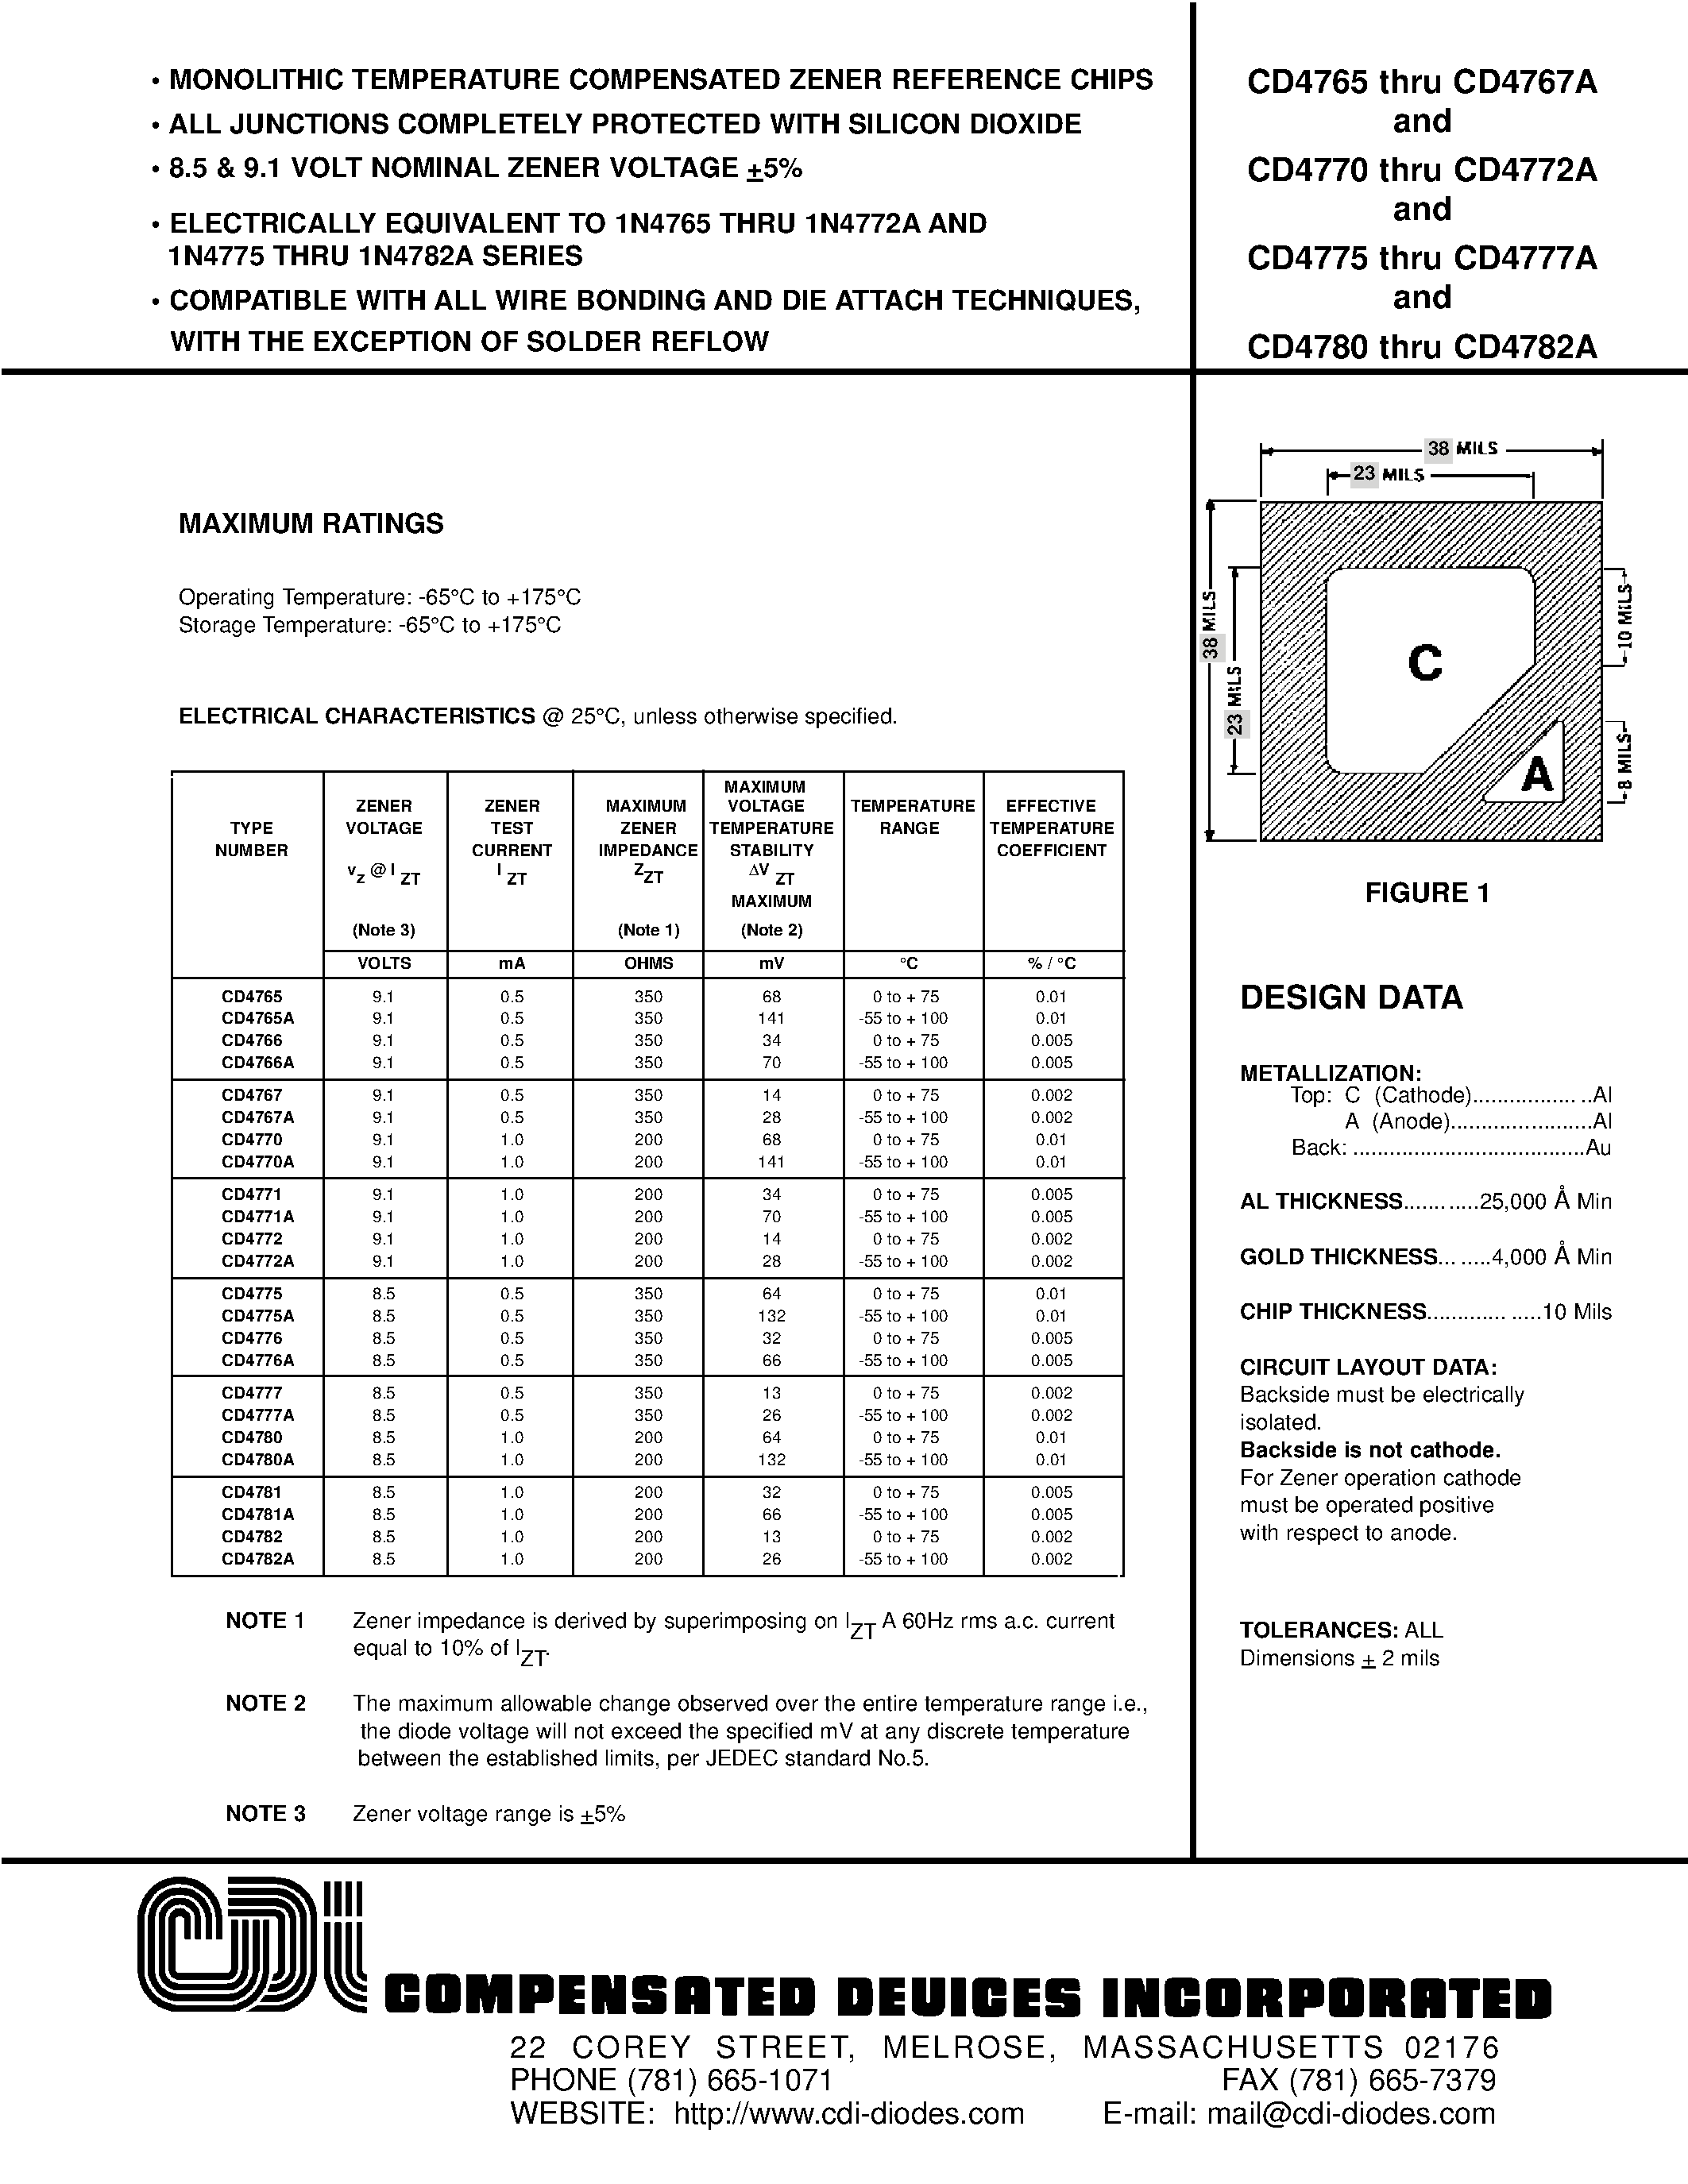 Datasheet CD4767A - MONOLITHIC TEMPERATURE COMPENSATED ZENER REFERENCE CHIPS page 1